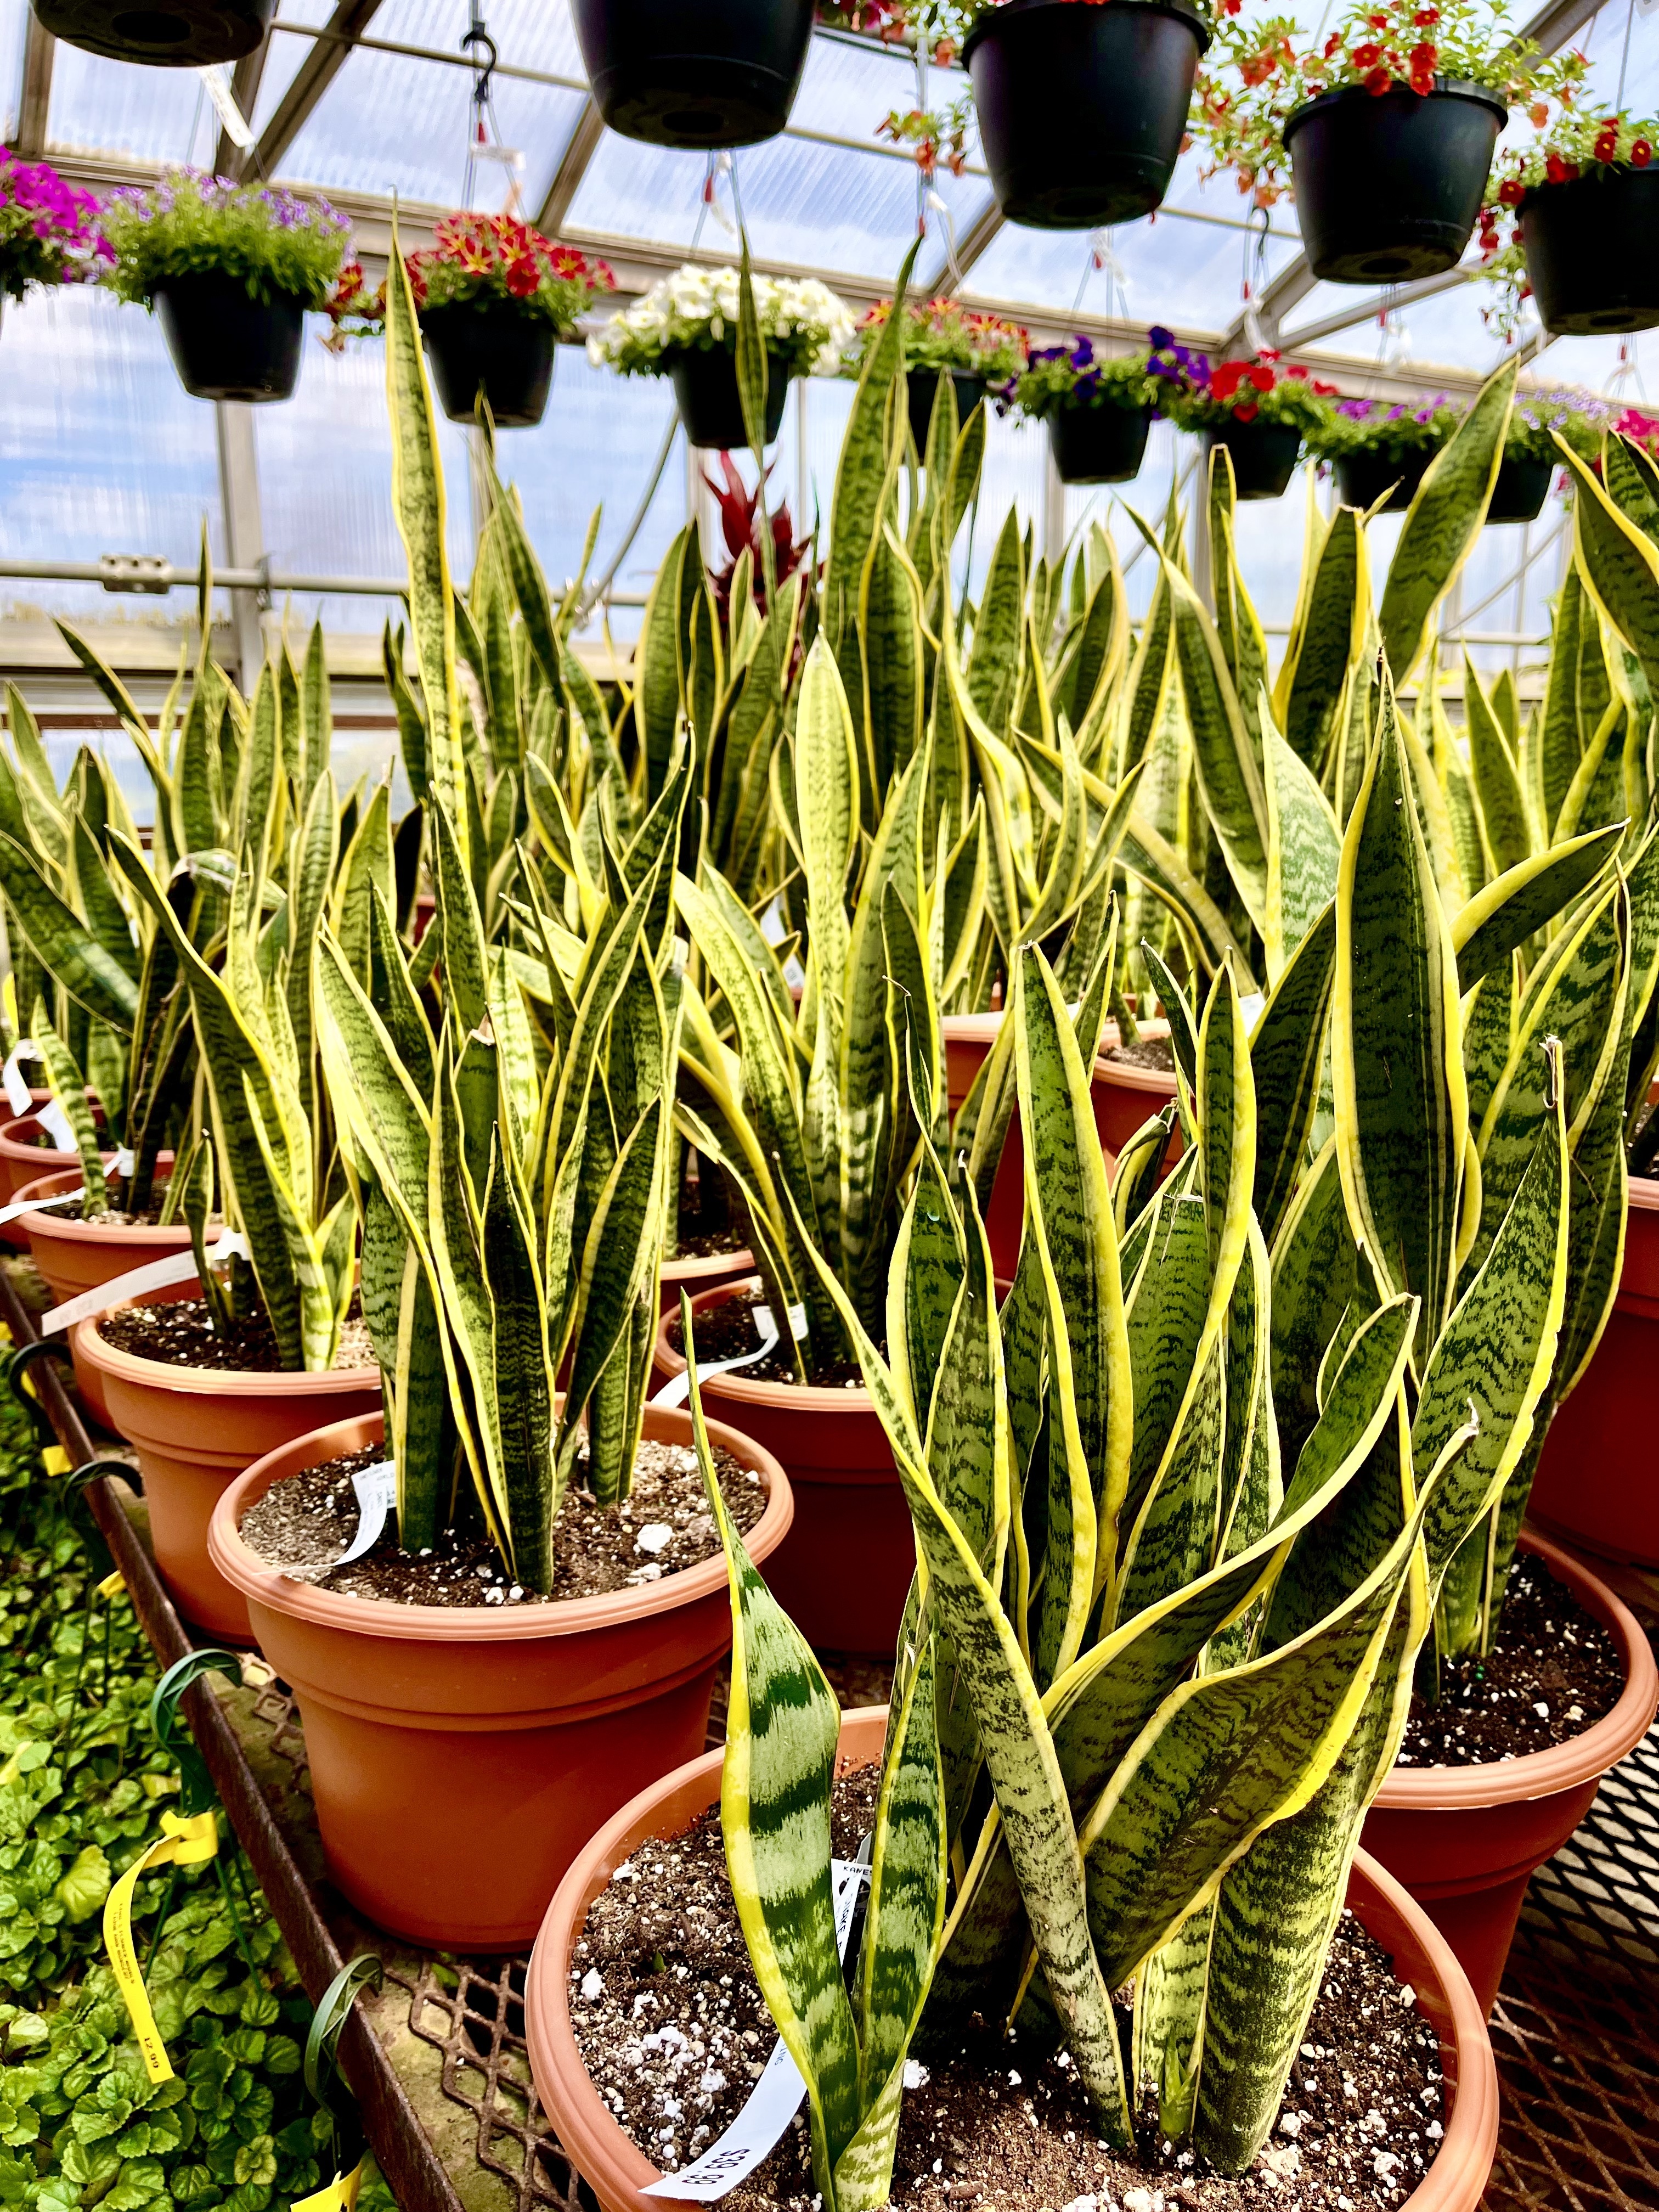 A group of snake plants in a sunny greenhouse.